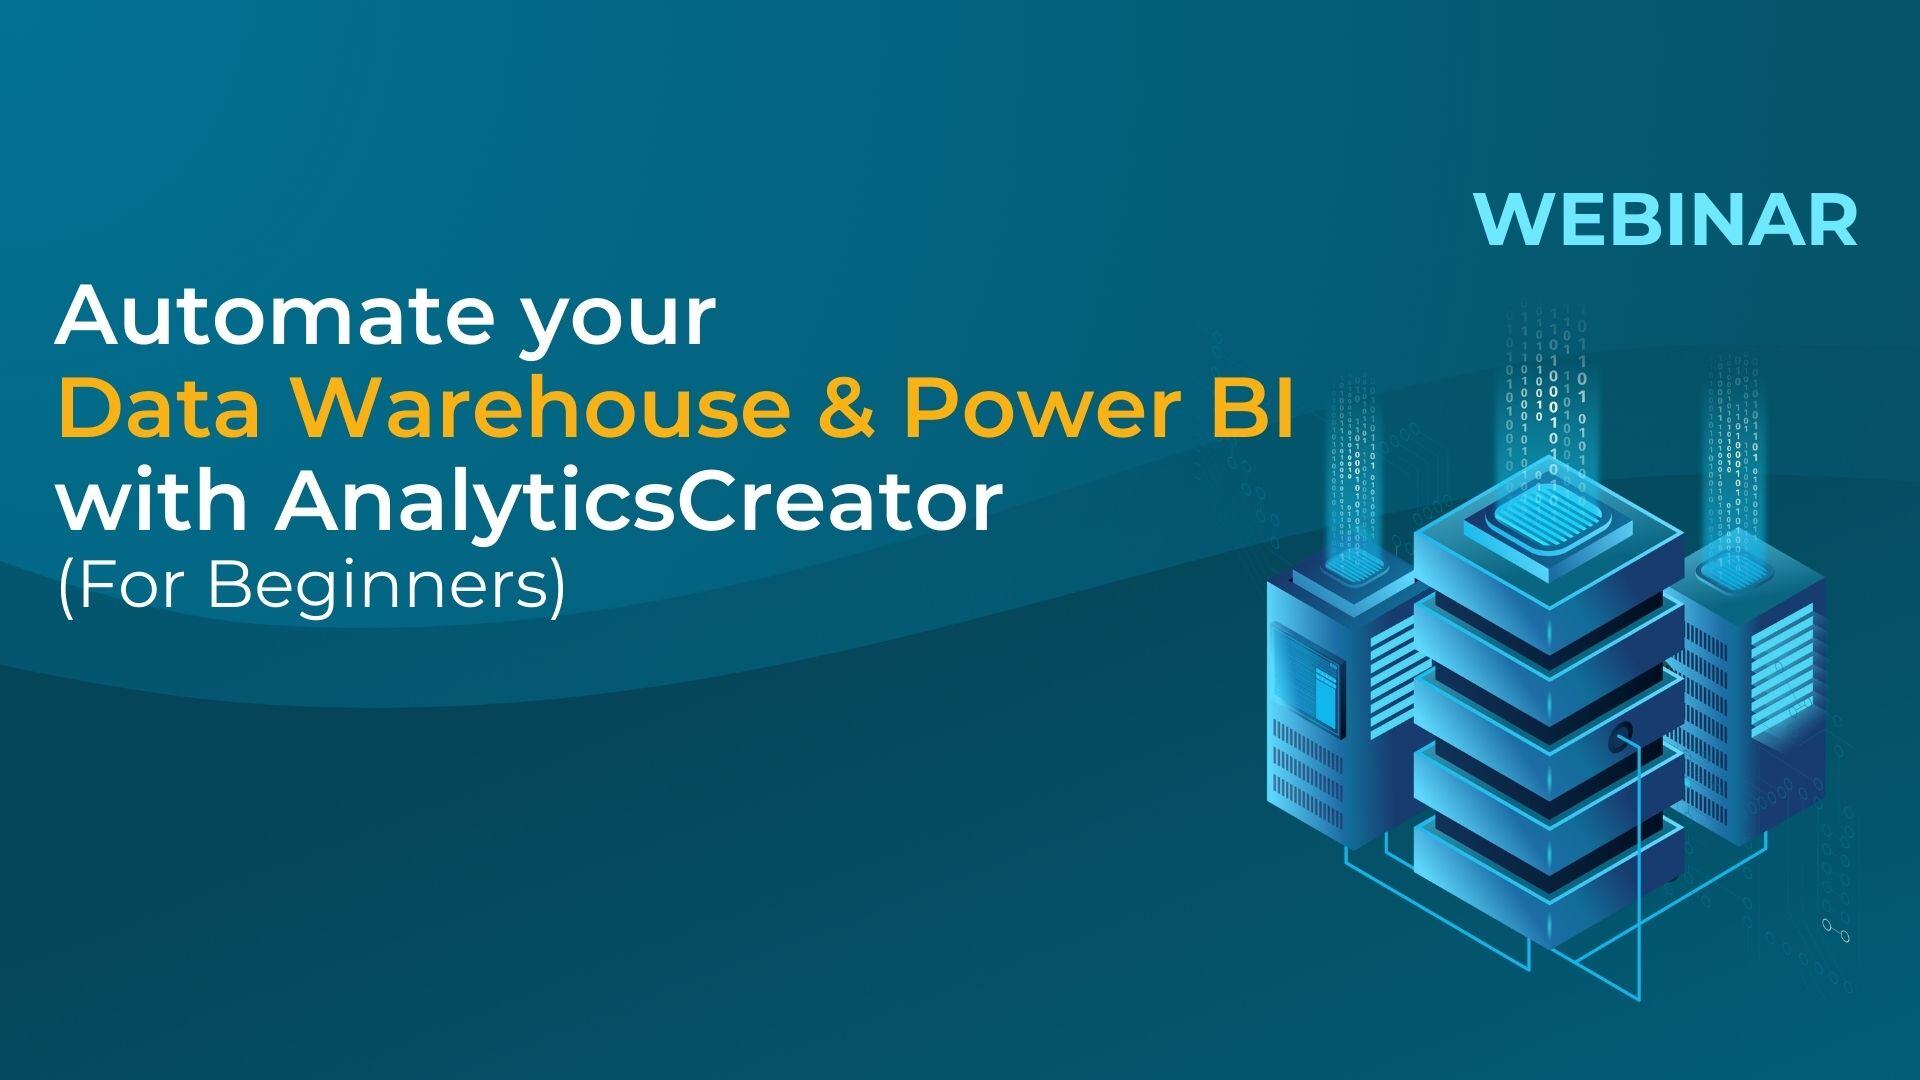 Automate Your Data Warehouse & Power BI with AnalyticsCreator (For Beginners)